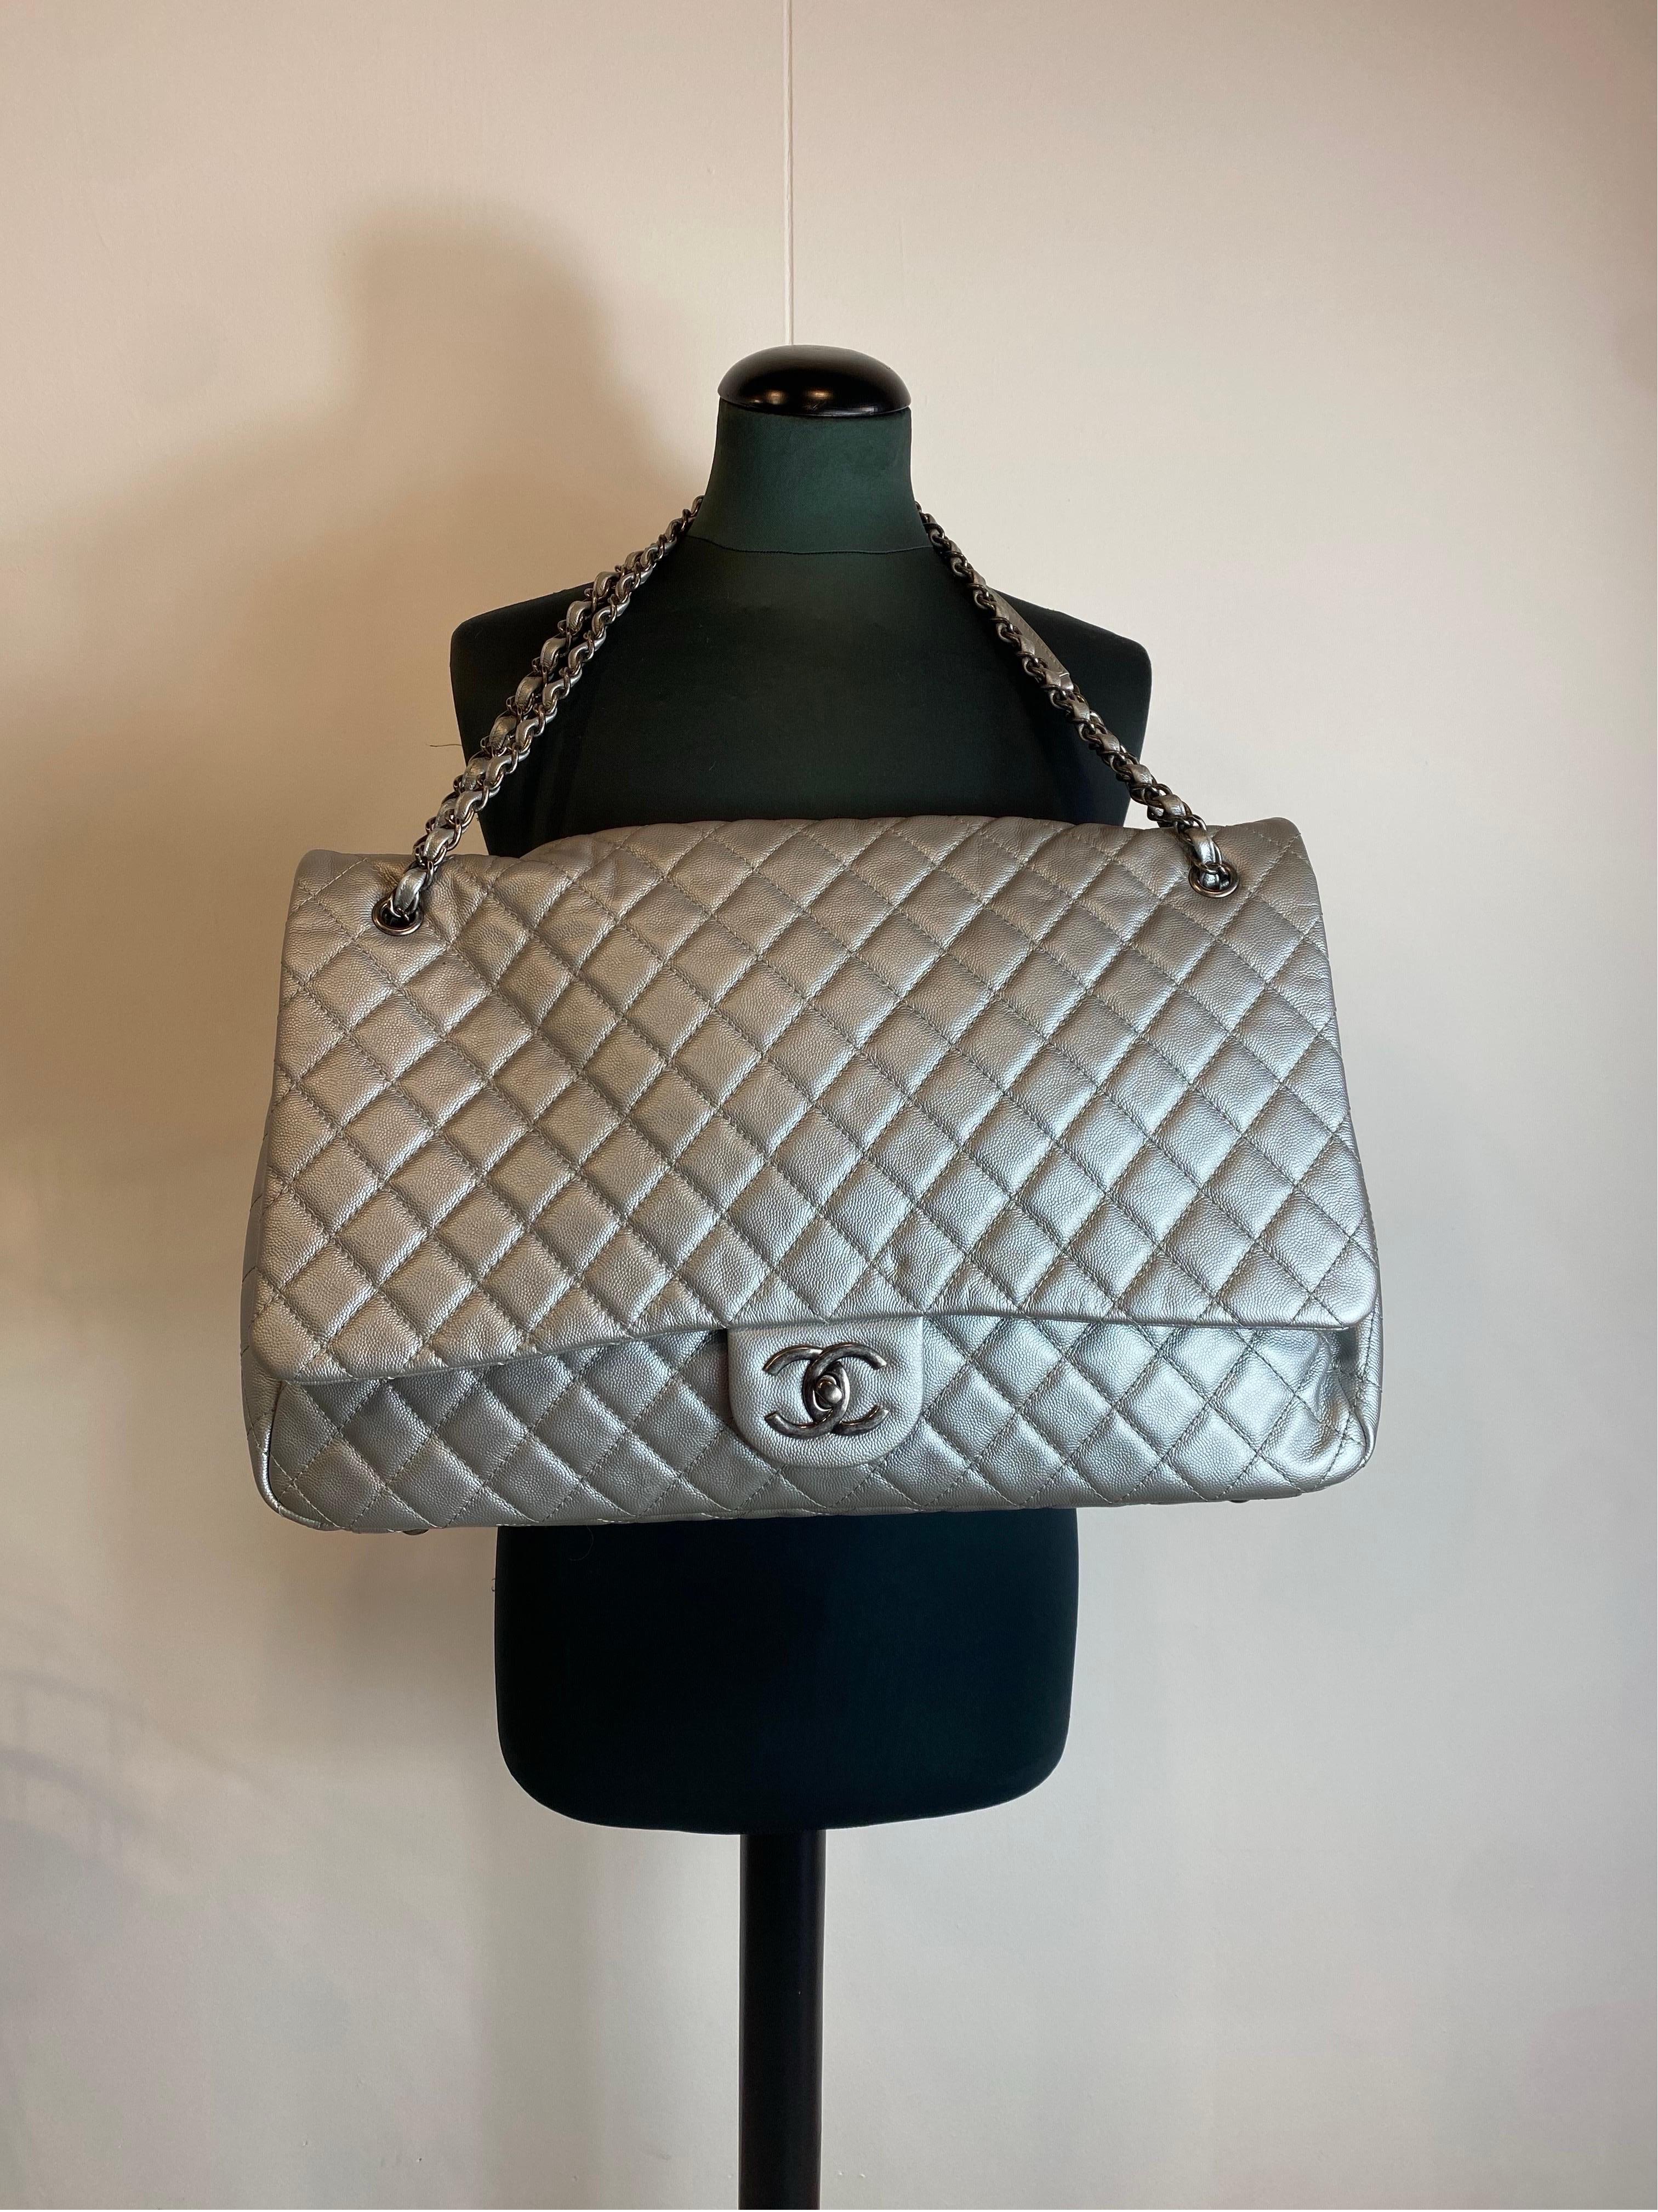 Chanel XXL silver Travel Bag In Excellent Condition For Sale In Carnate, IT